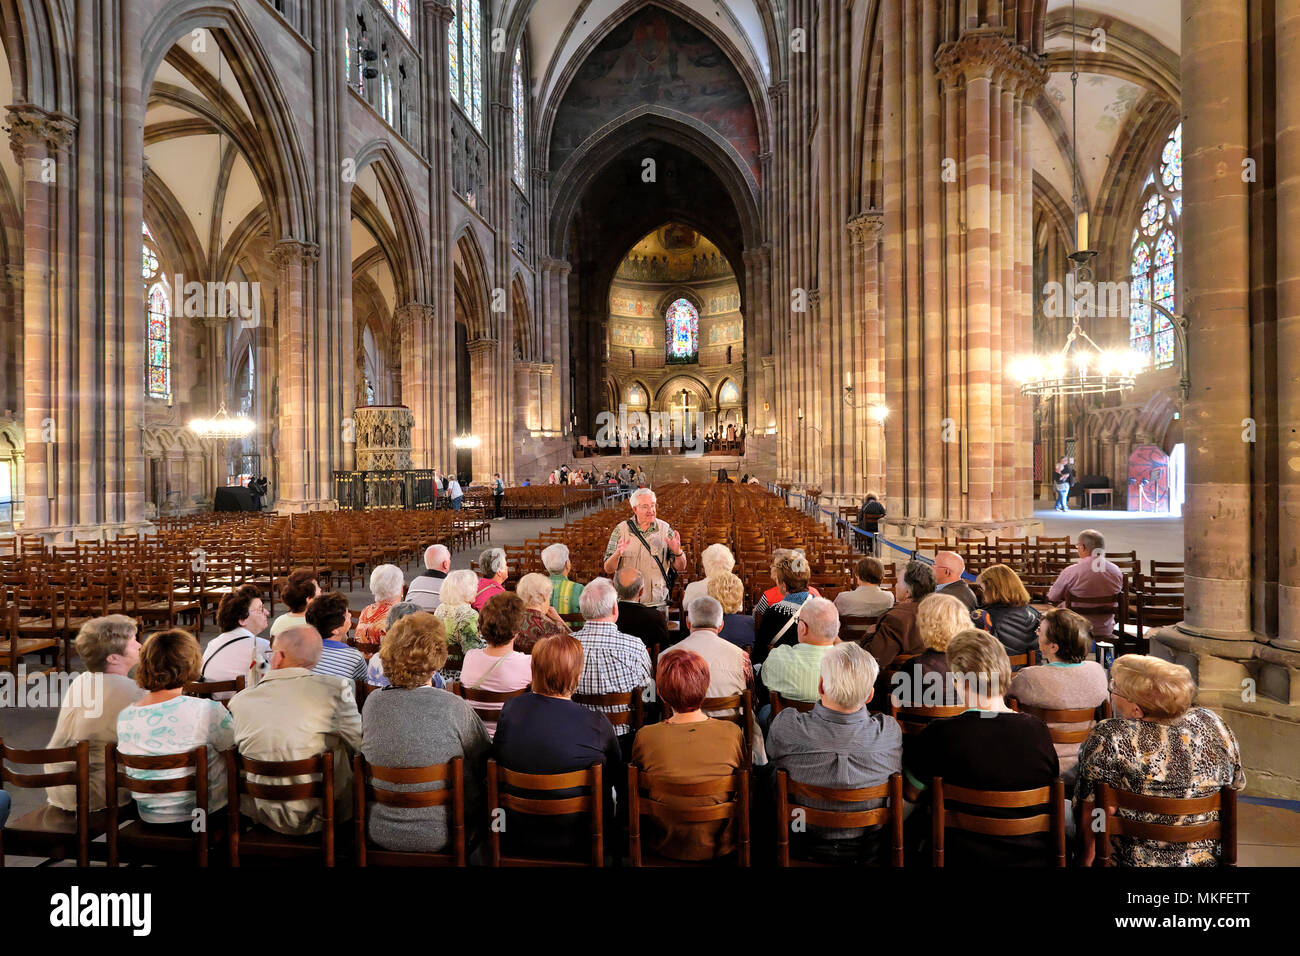 Tour guide and his group of Western / European tourists, Strasbourg Cathedral / Cathédrale de Strasbourg, Strasbourg, Alsace, France Stock Photo